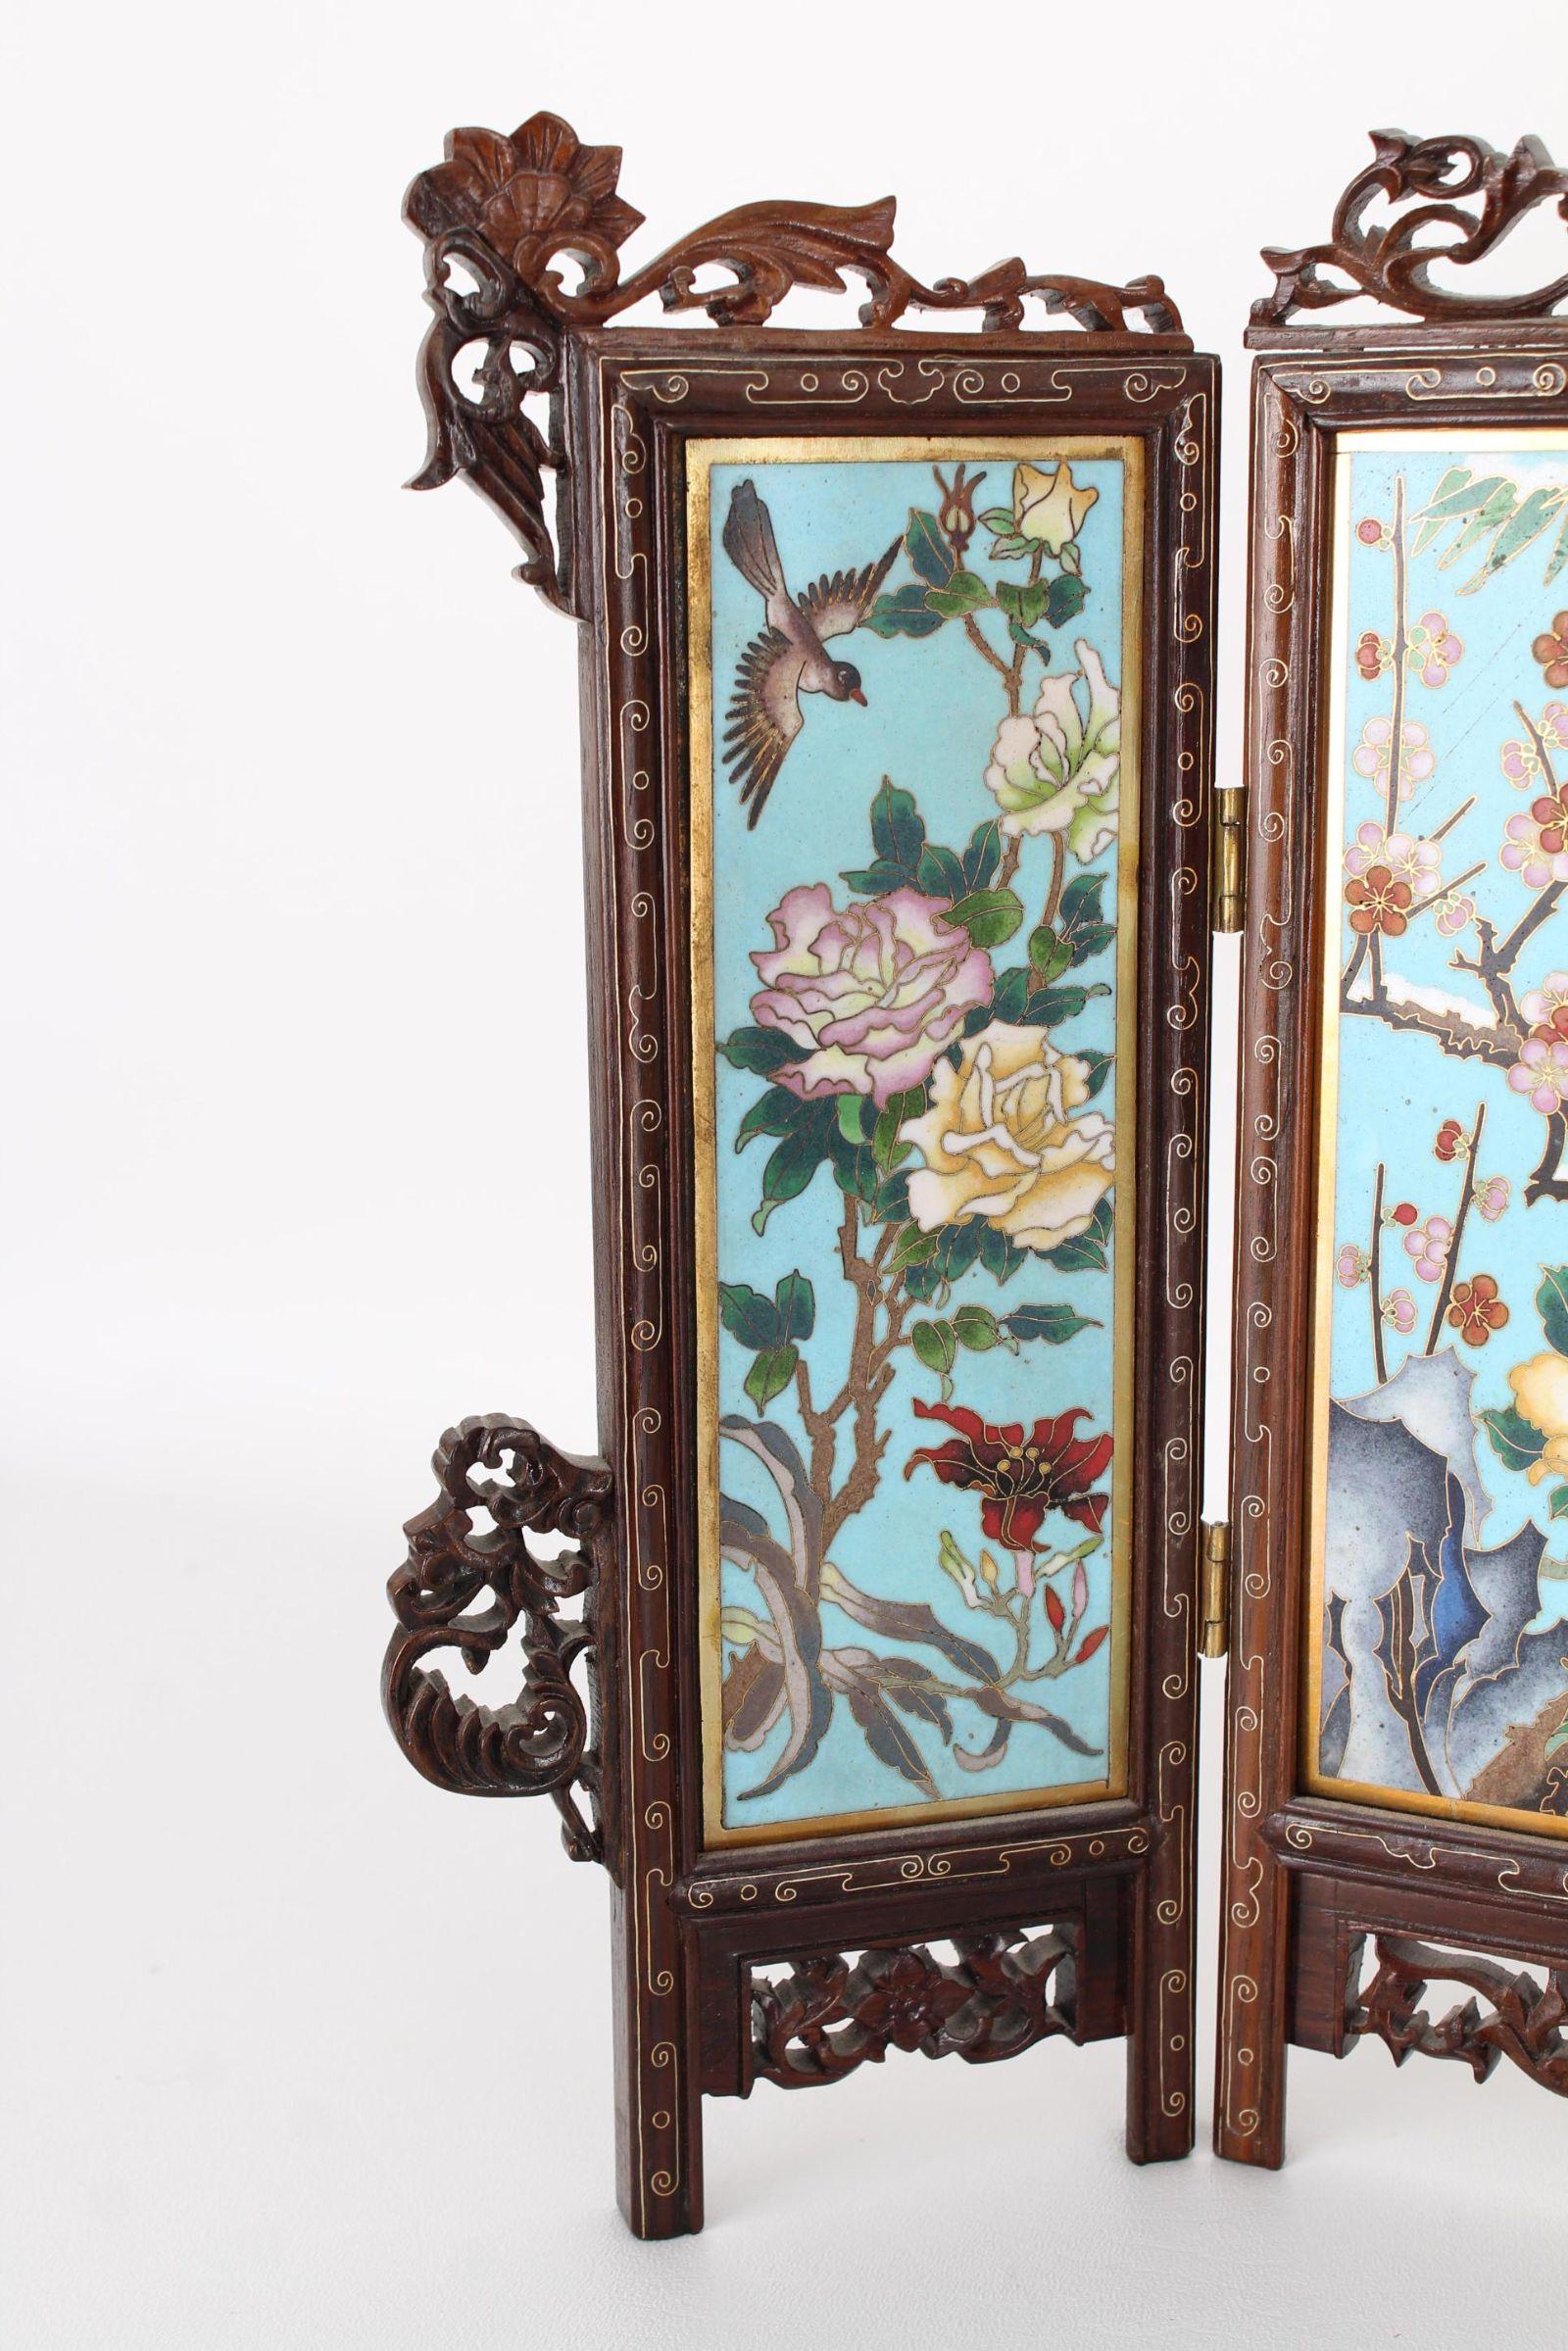 Cloissoné Chinese Cloisonne Enamel and Hardwood Table Screen with Birds Motif